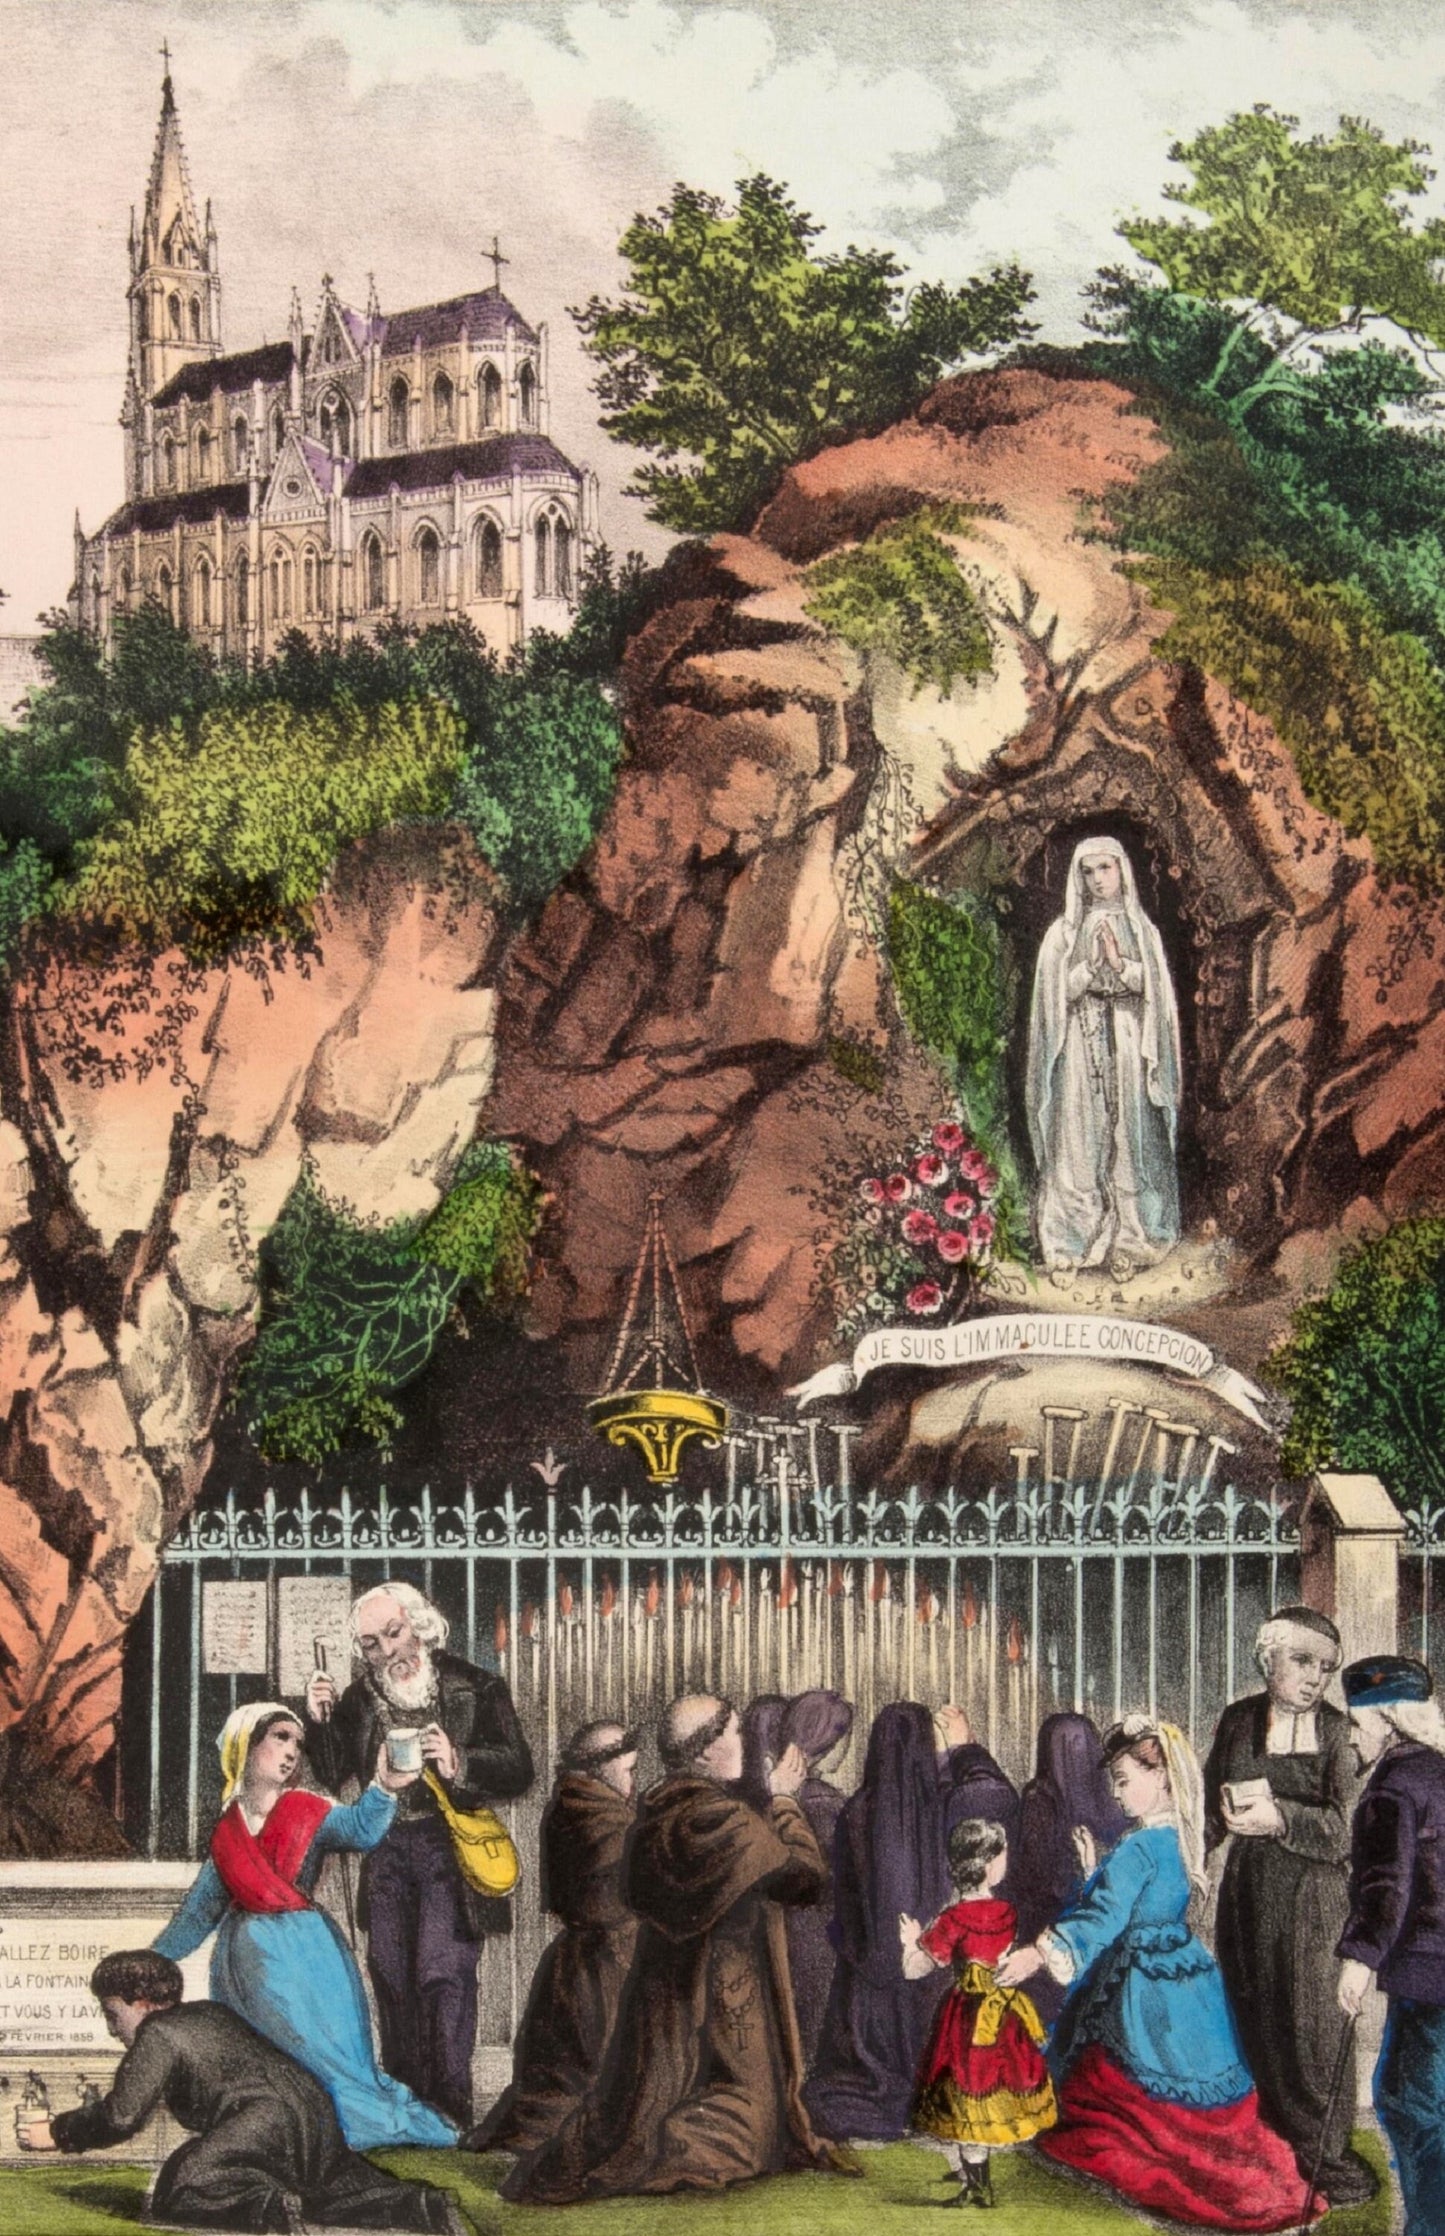 New! Currier & Ive's "Pilgrims to Lourdes" Holy Card – Healing Prayer – pack of 10/100/1000